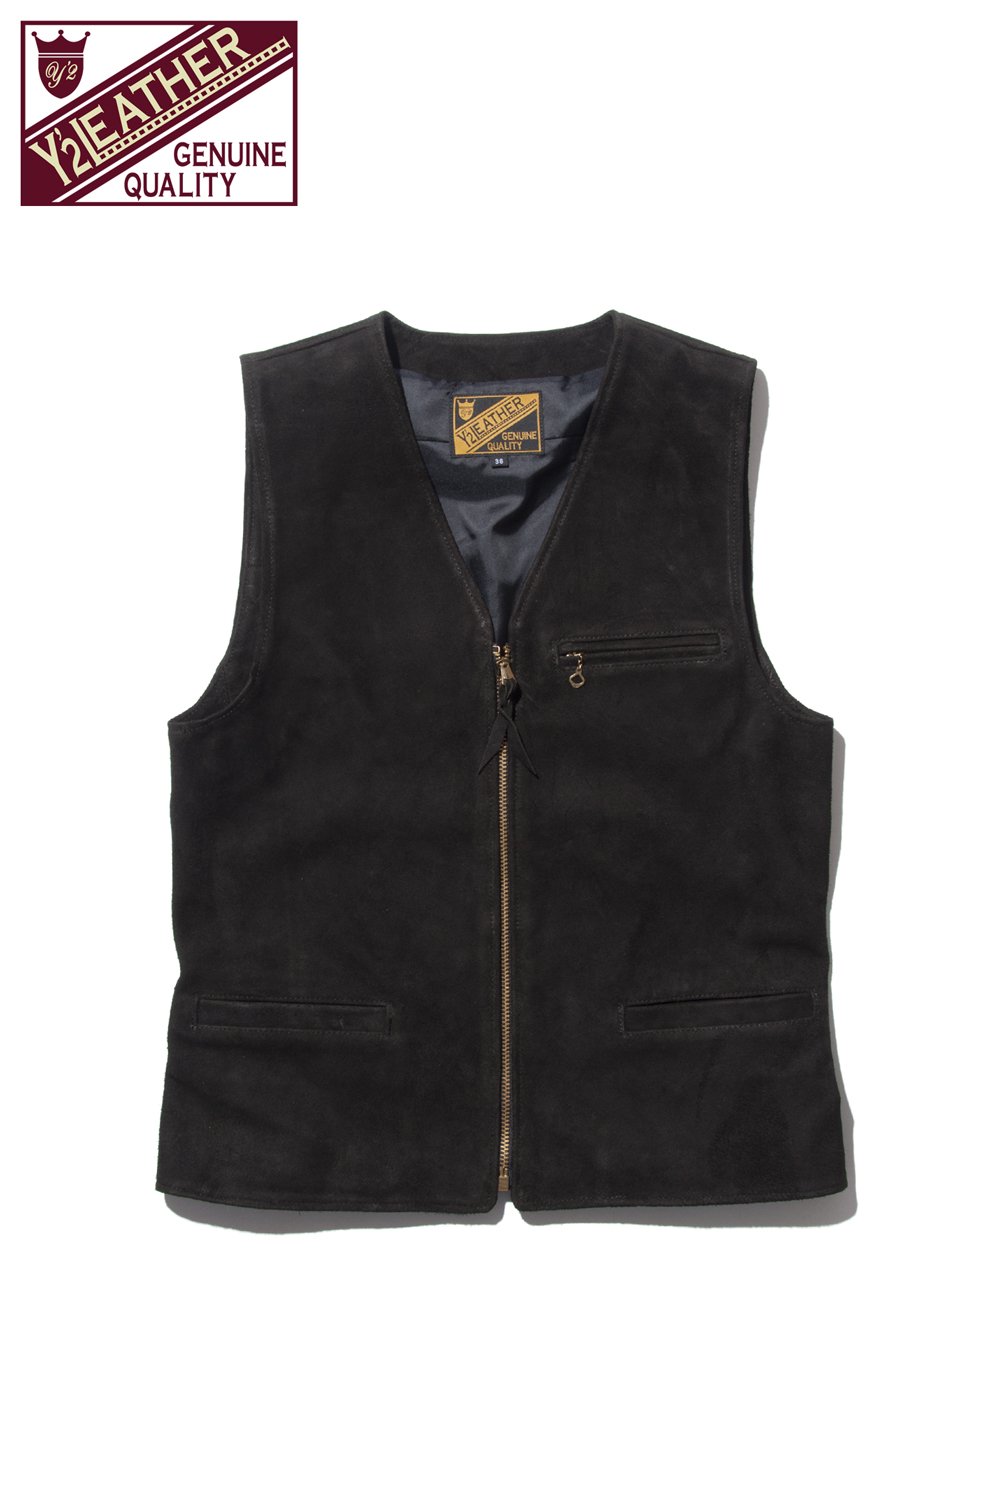 Y'2 LEATHER(ワイツーレザー) カウスエードベスト COW SUEDE ZIP VEST ...